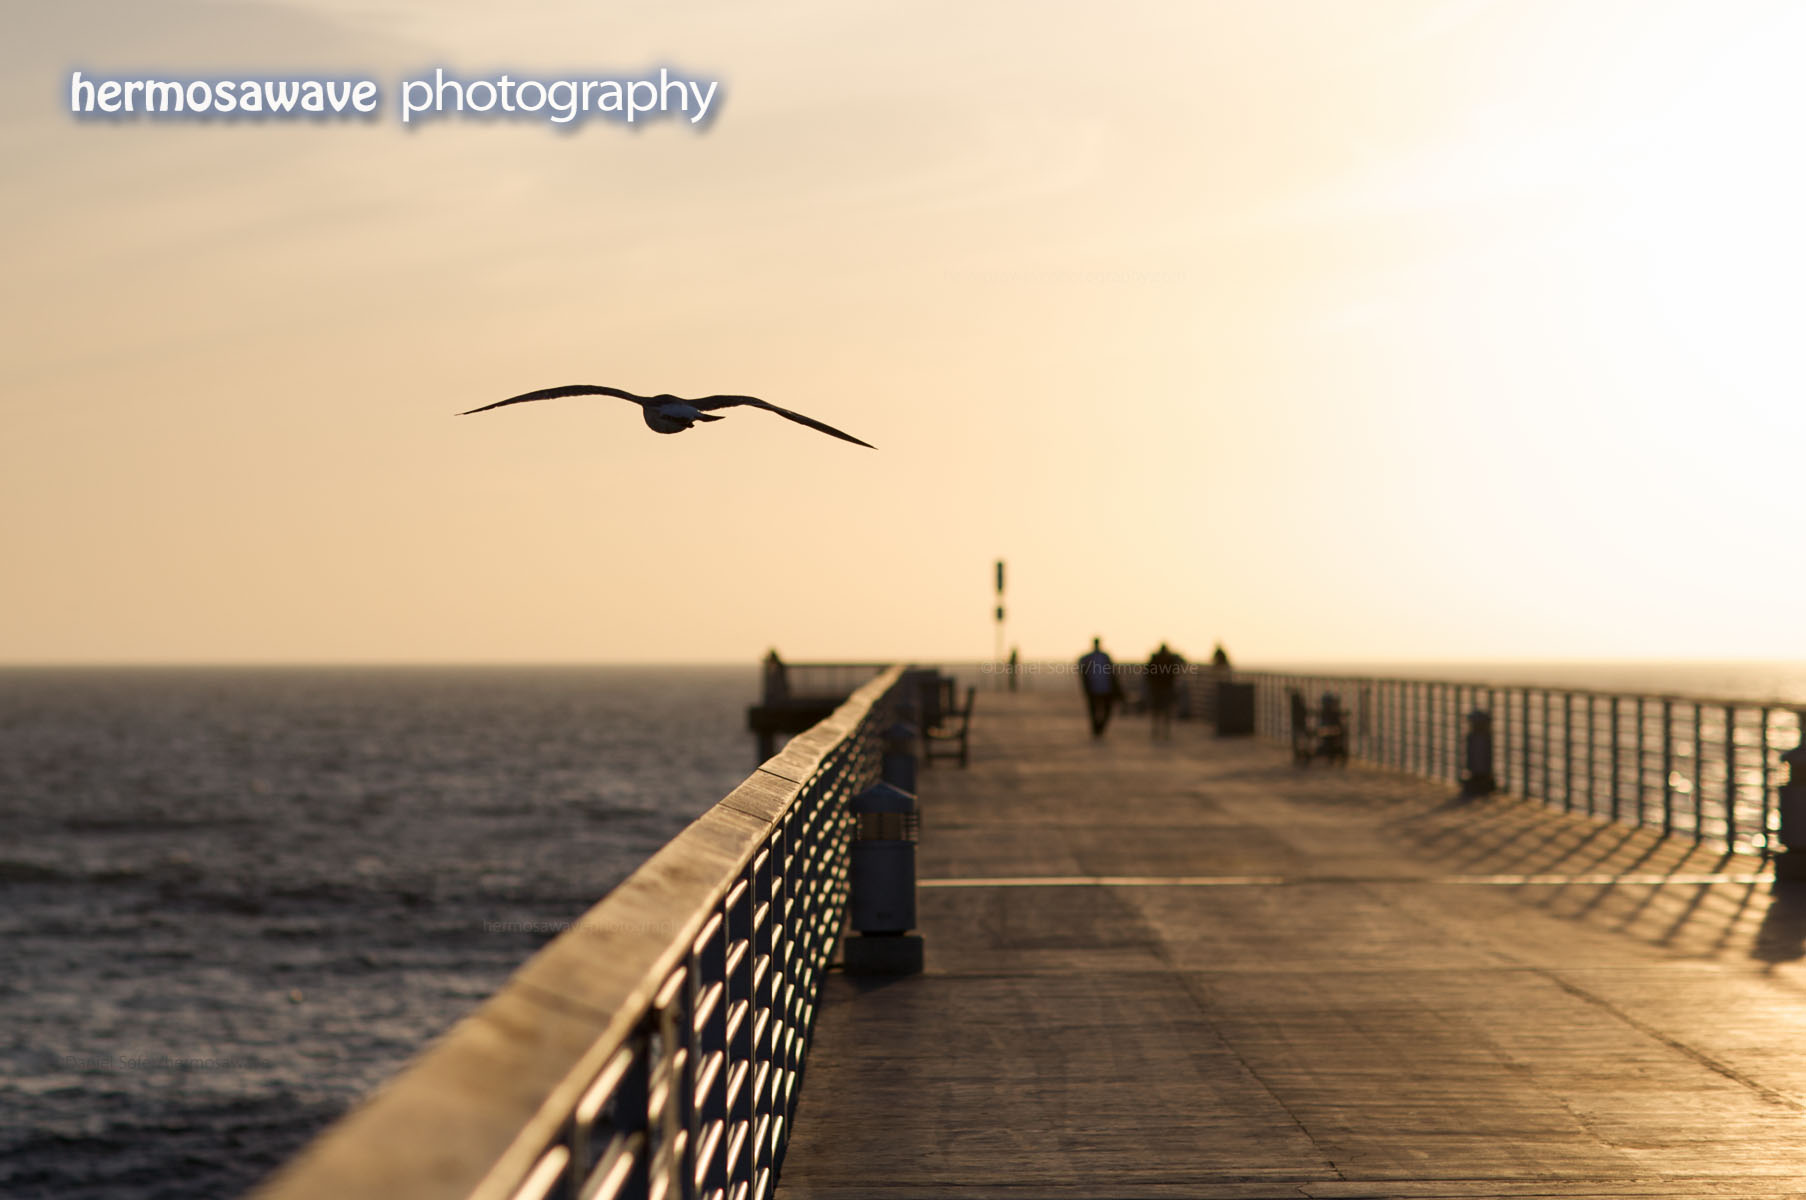 Seagull over the Pier